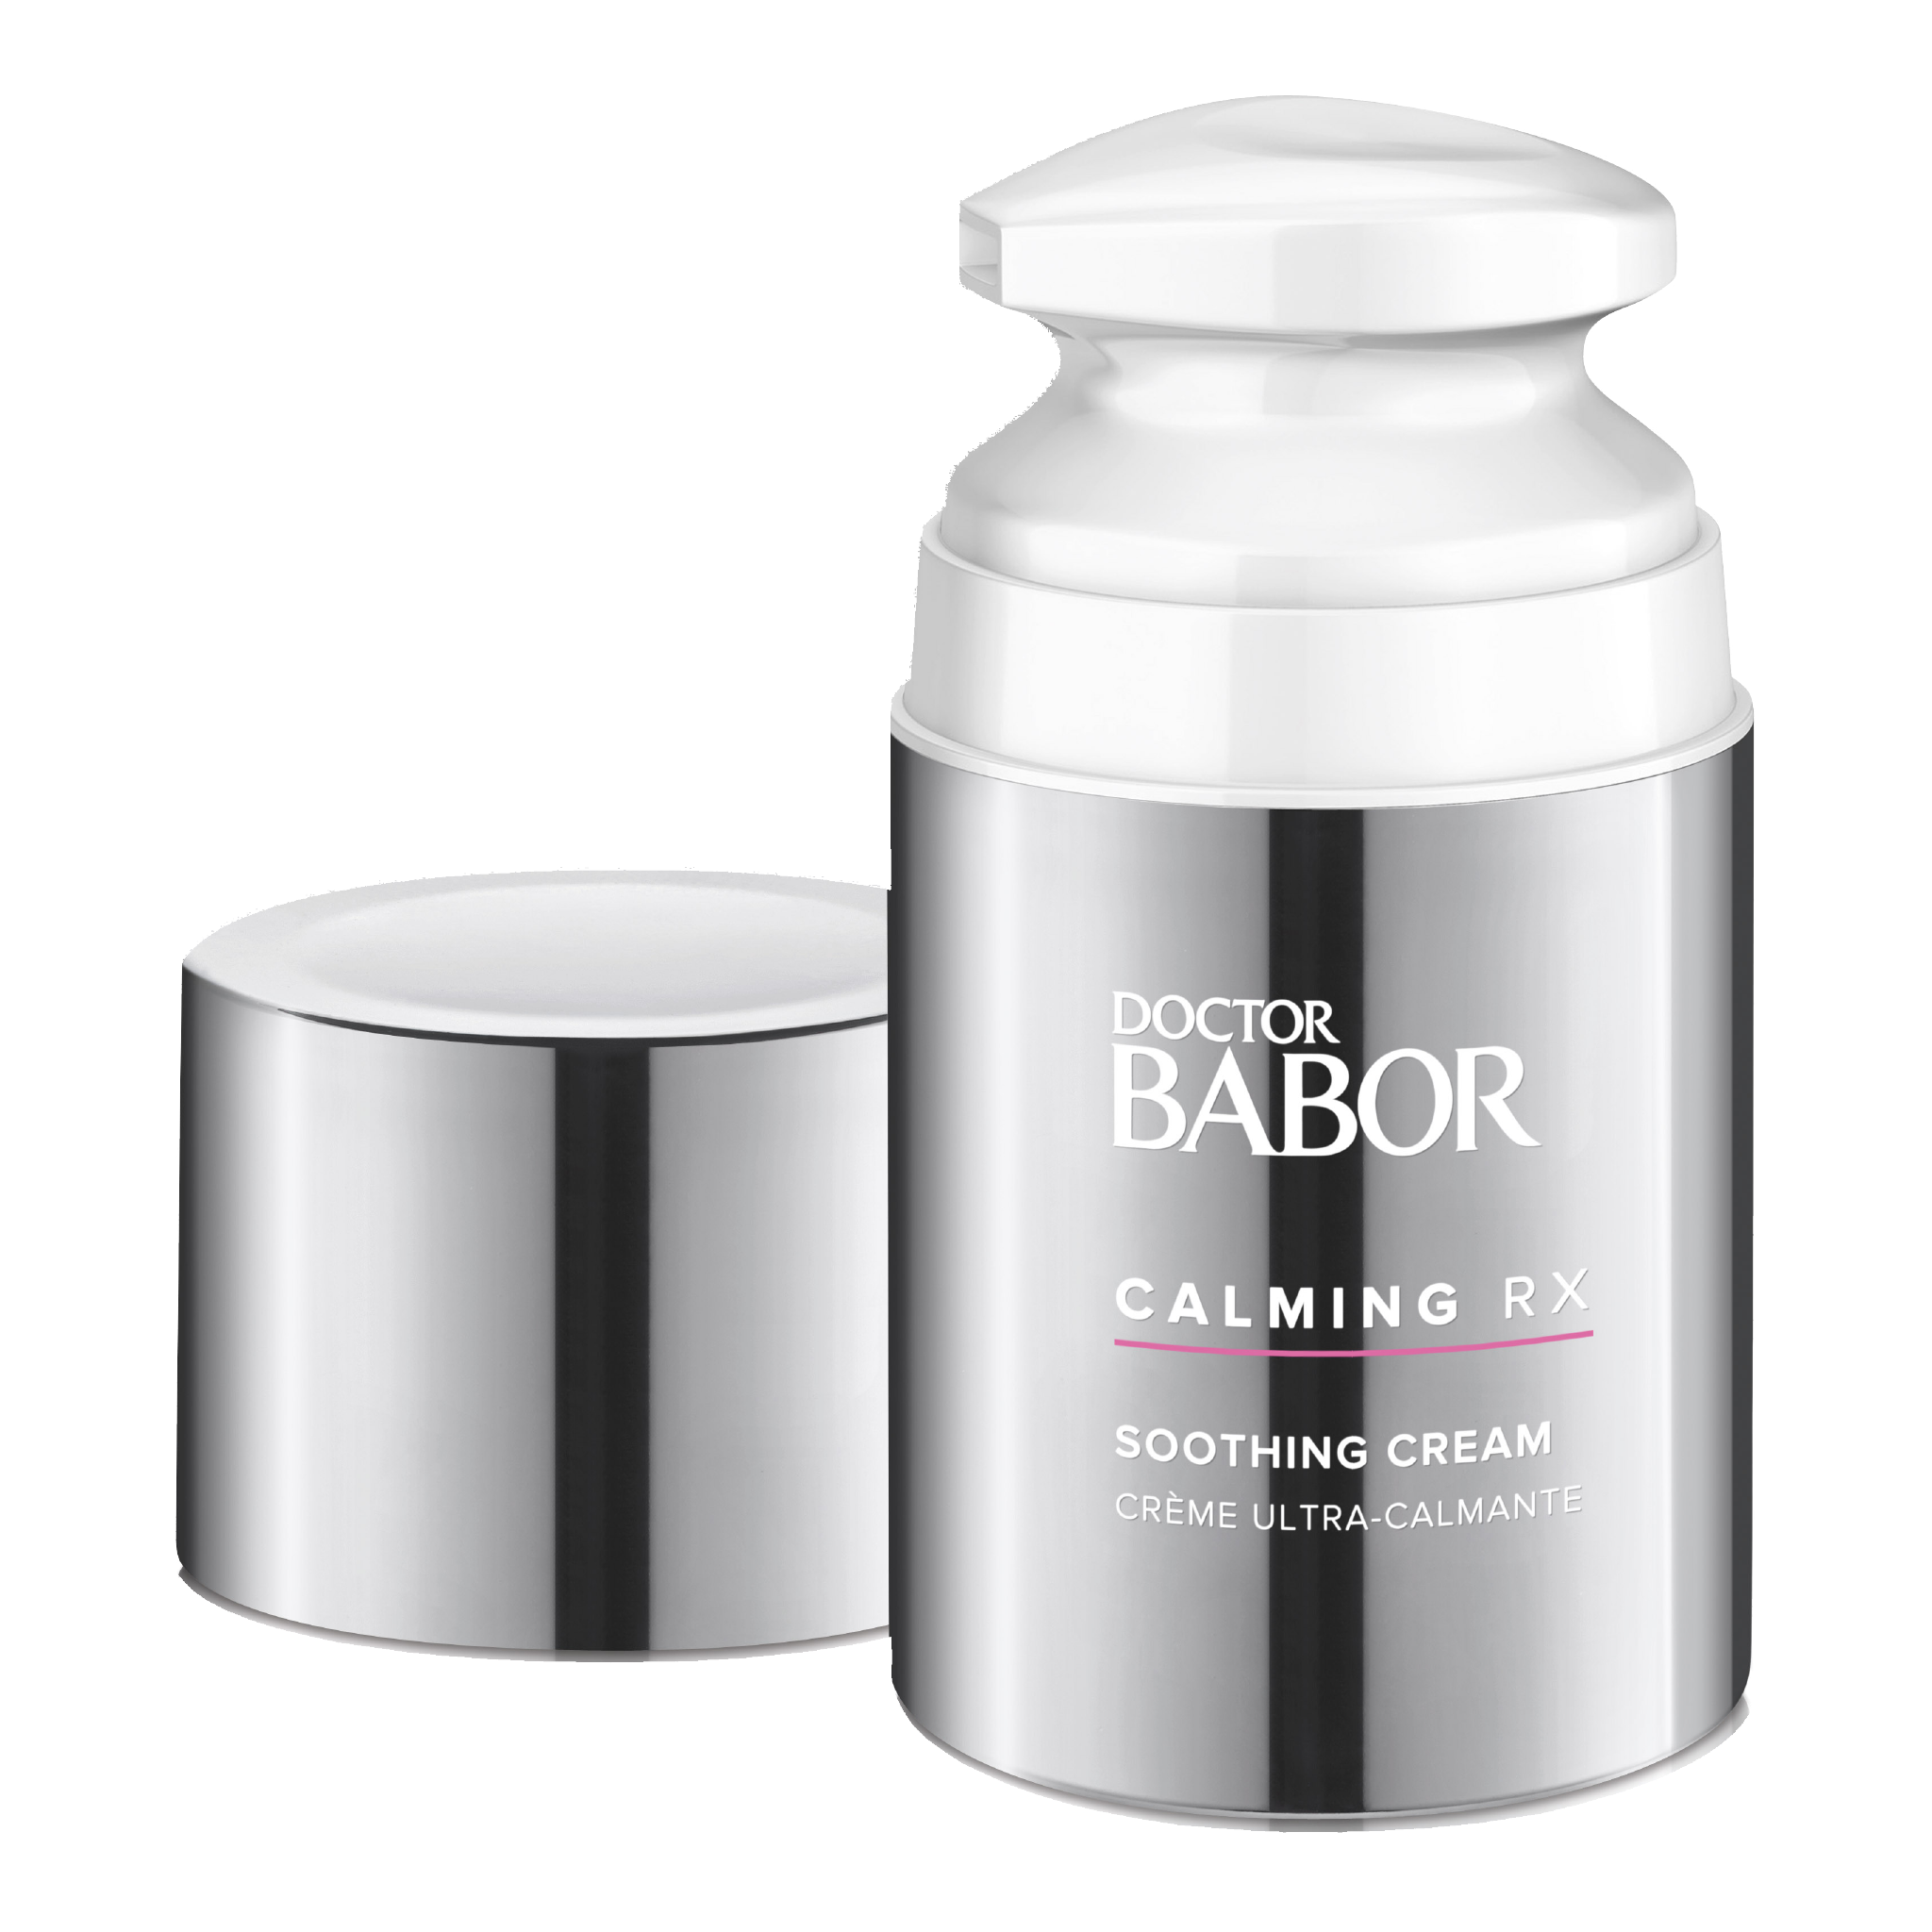 Doctor Babor Calming Rx Soothing Cream